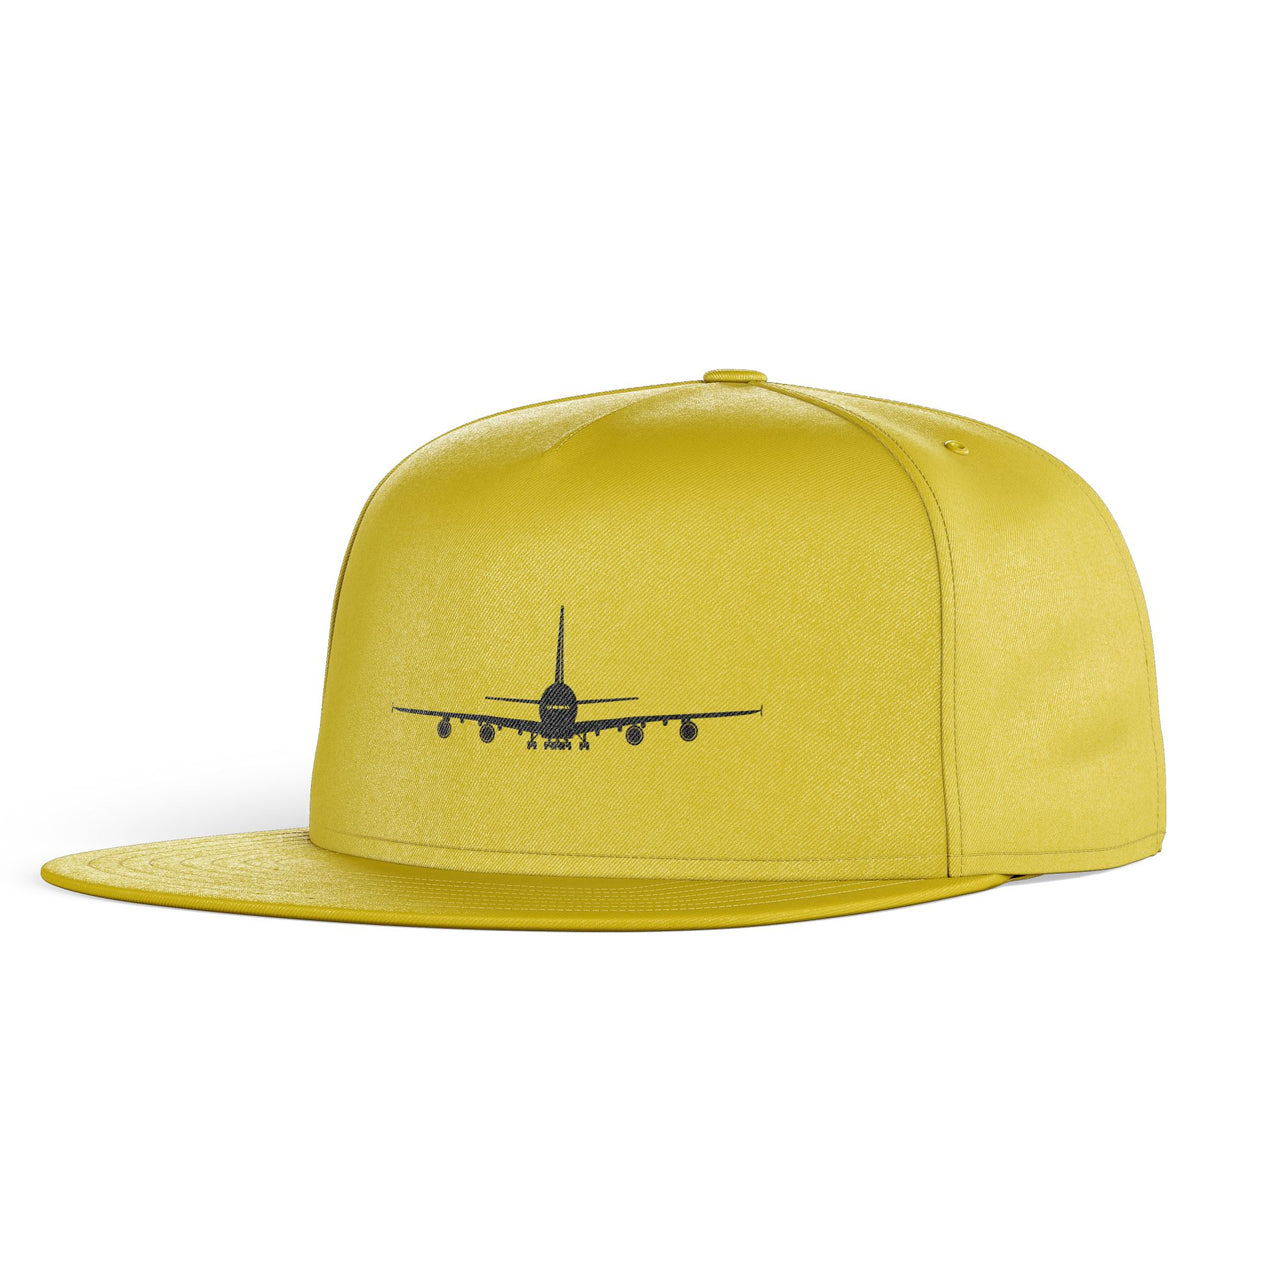 Airbus A380 Silhouette Designed Snapback Caps & Hats